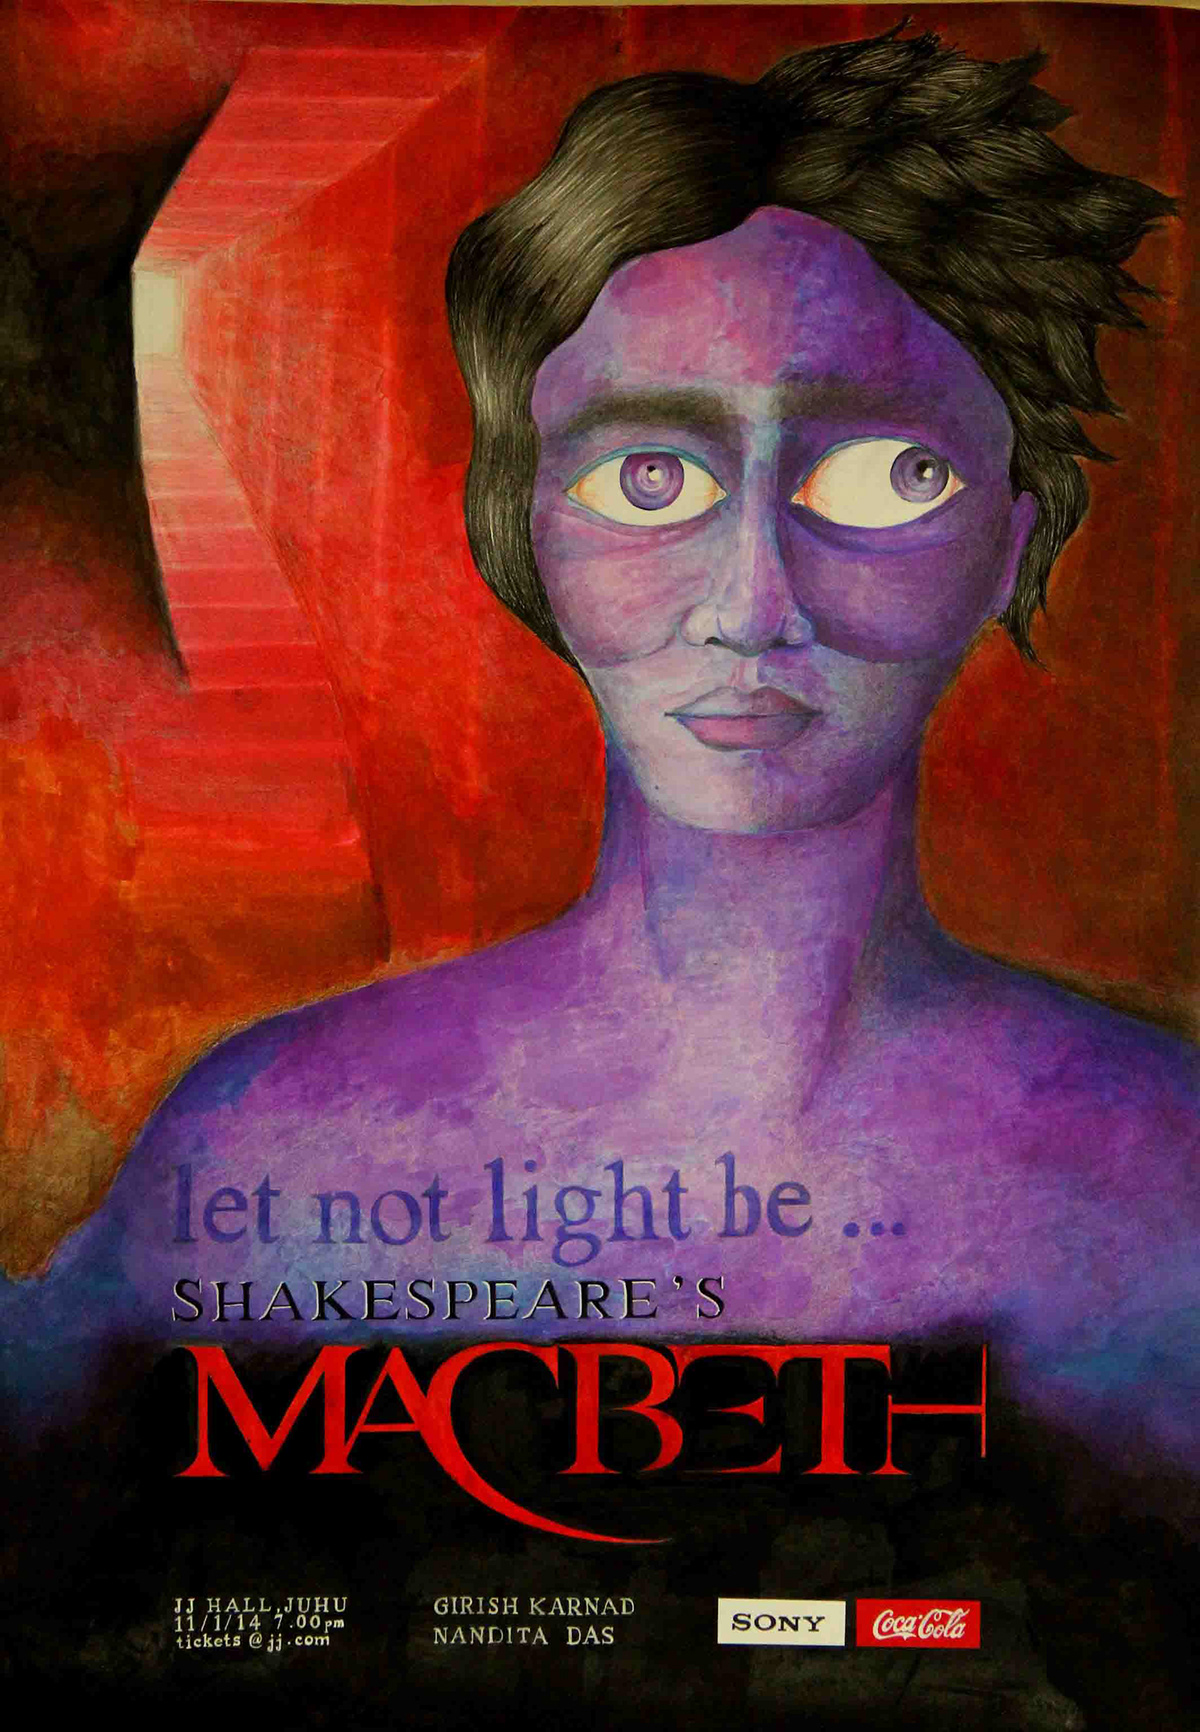 Hand done / Macbeth/ Poster